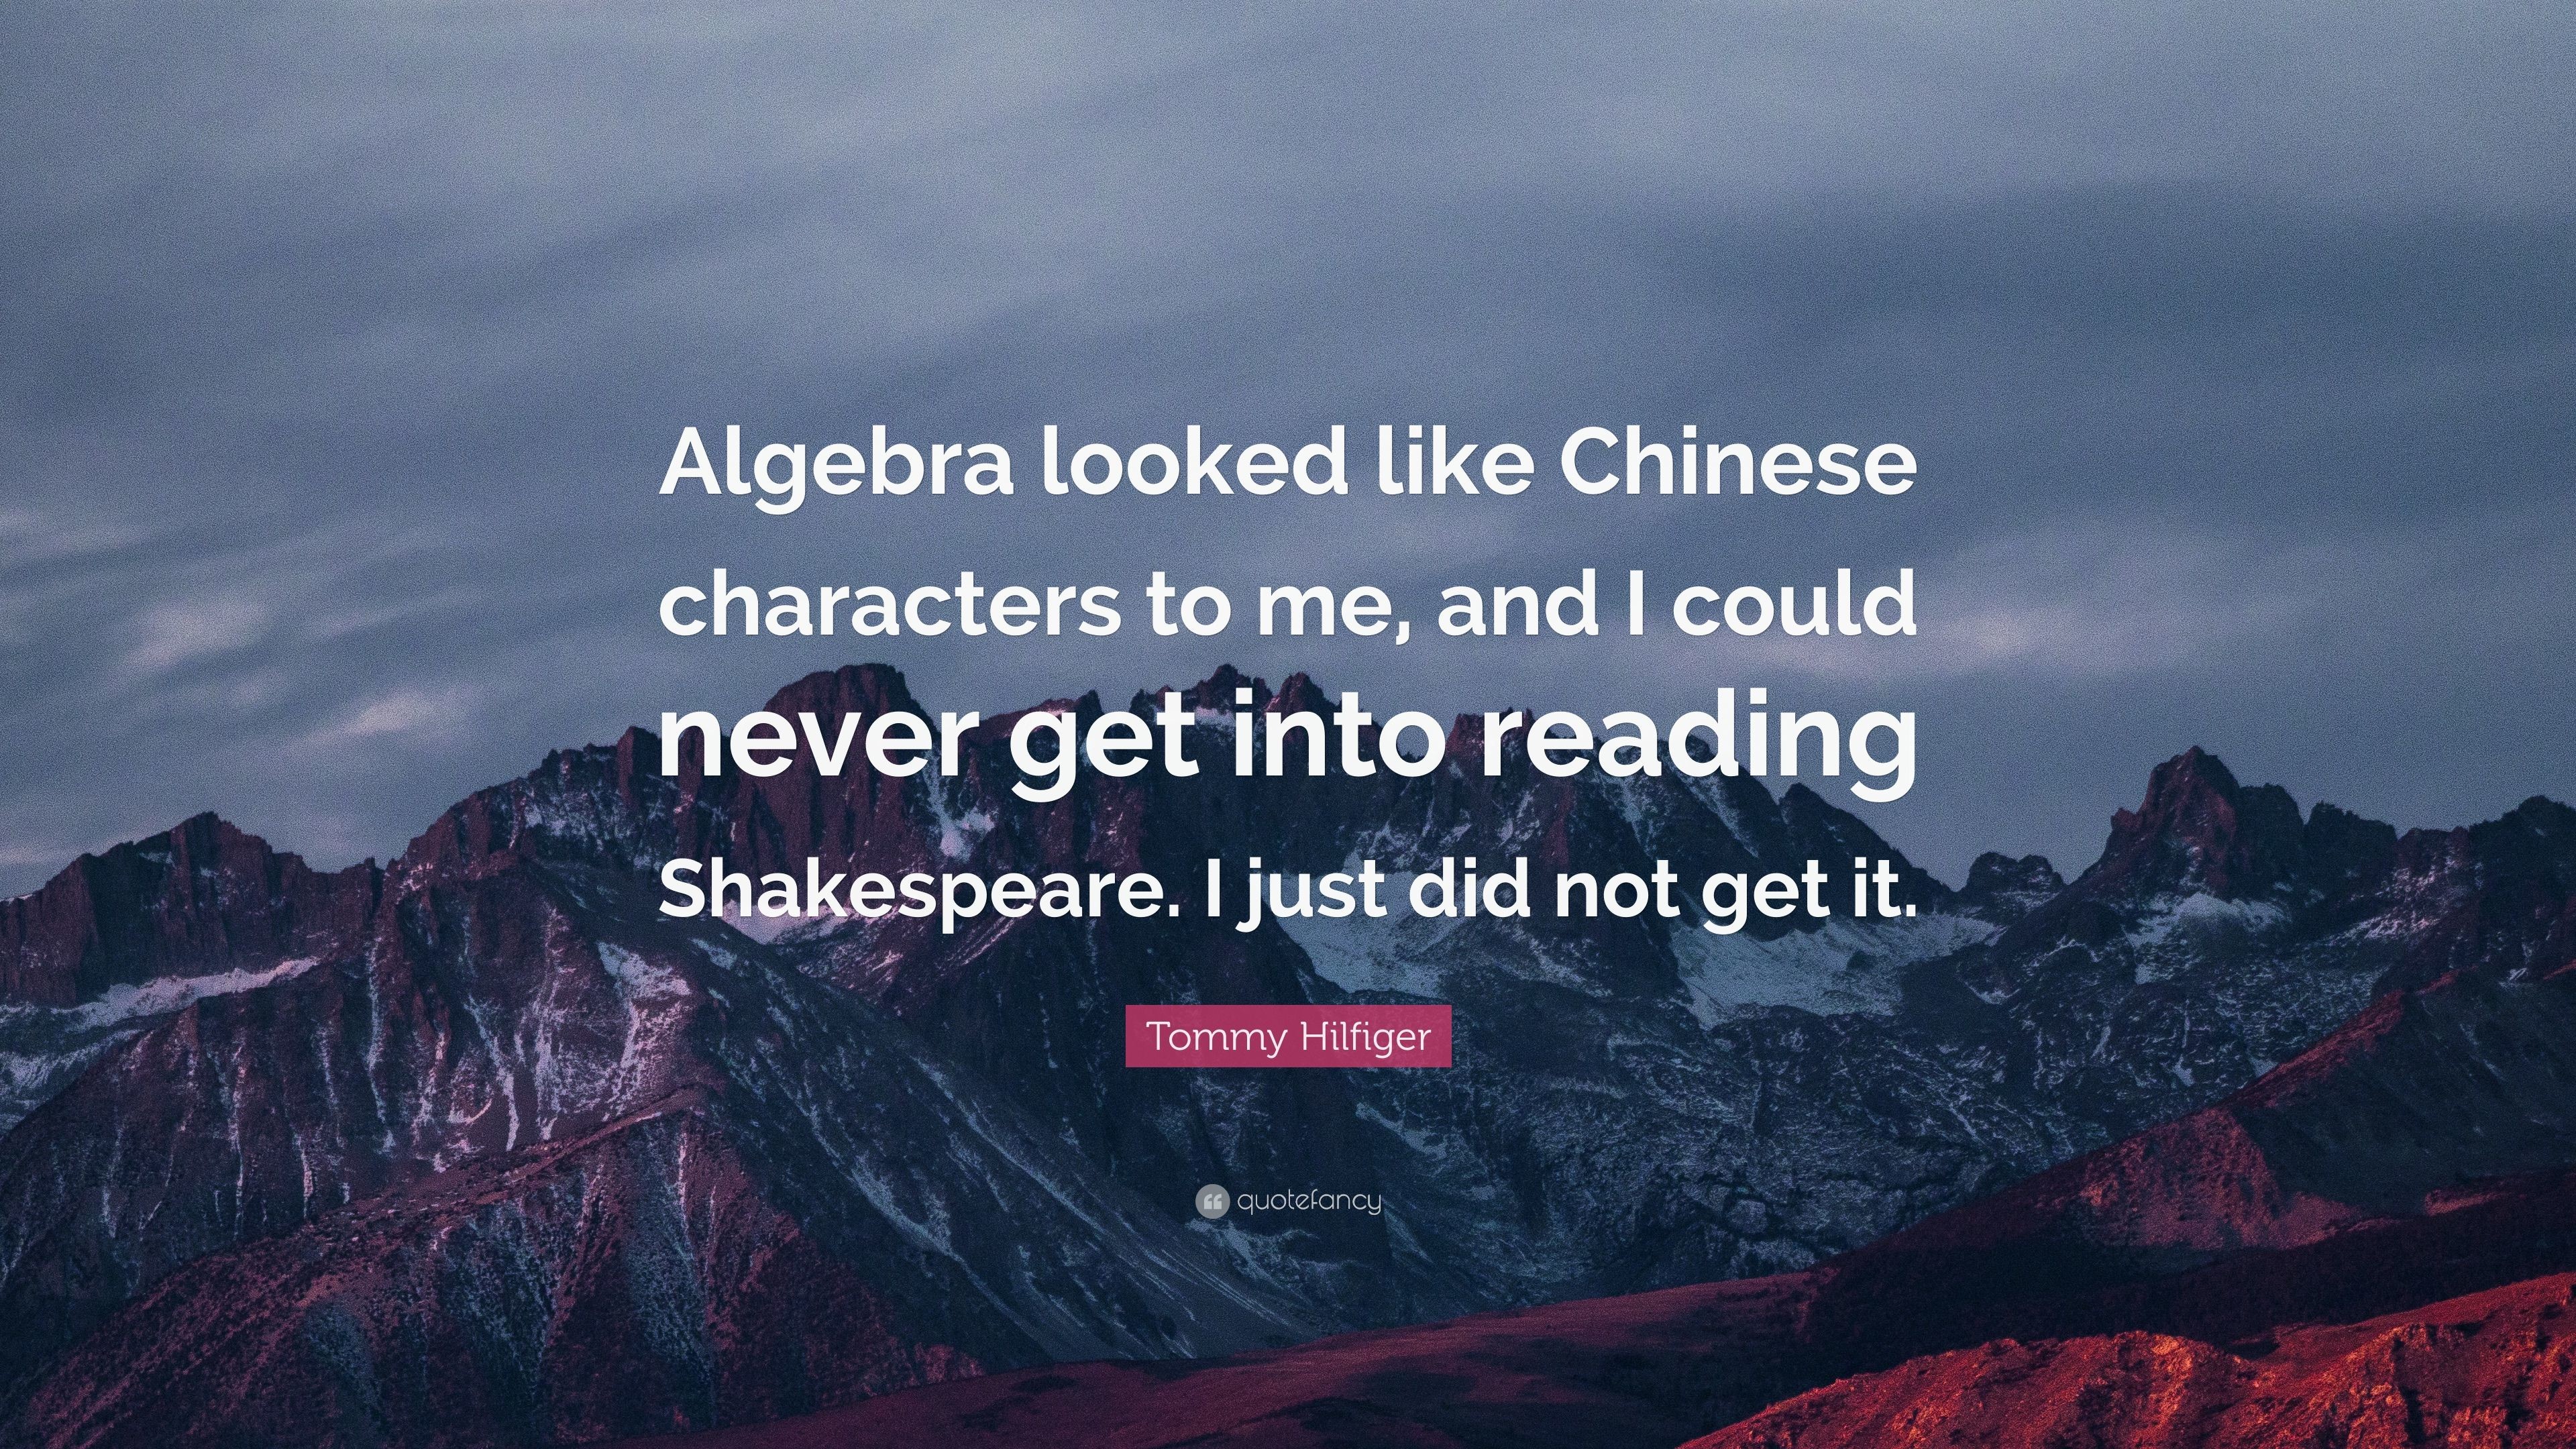 3840x2160 Tommy Hilfiger Quote: “Algebra looked like Chinese characters to me, and I  could